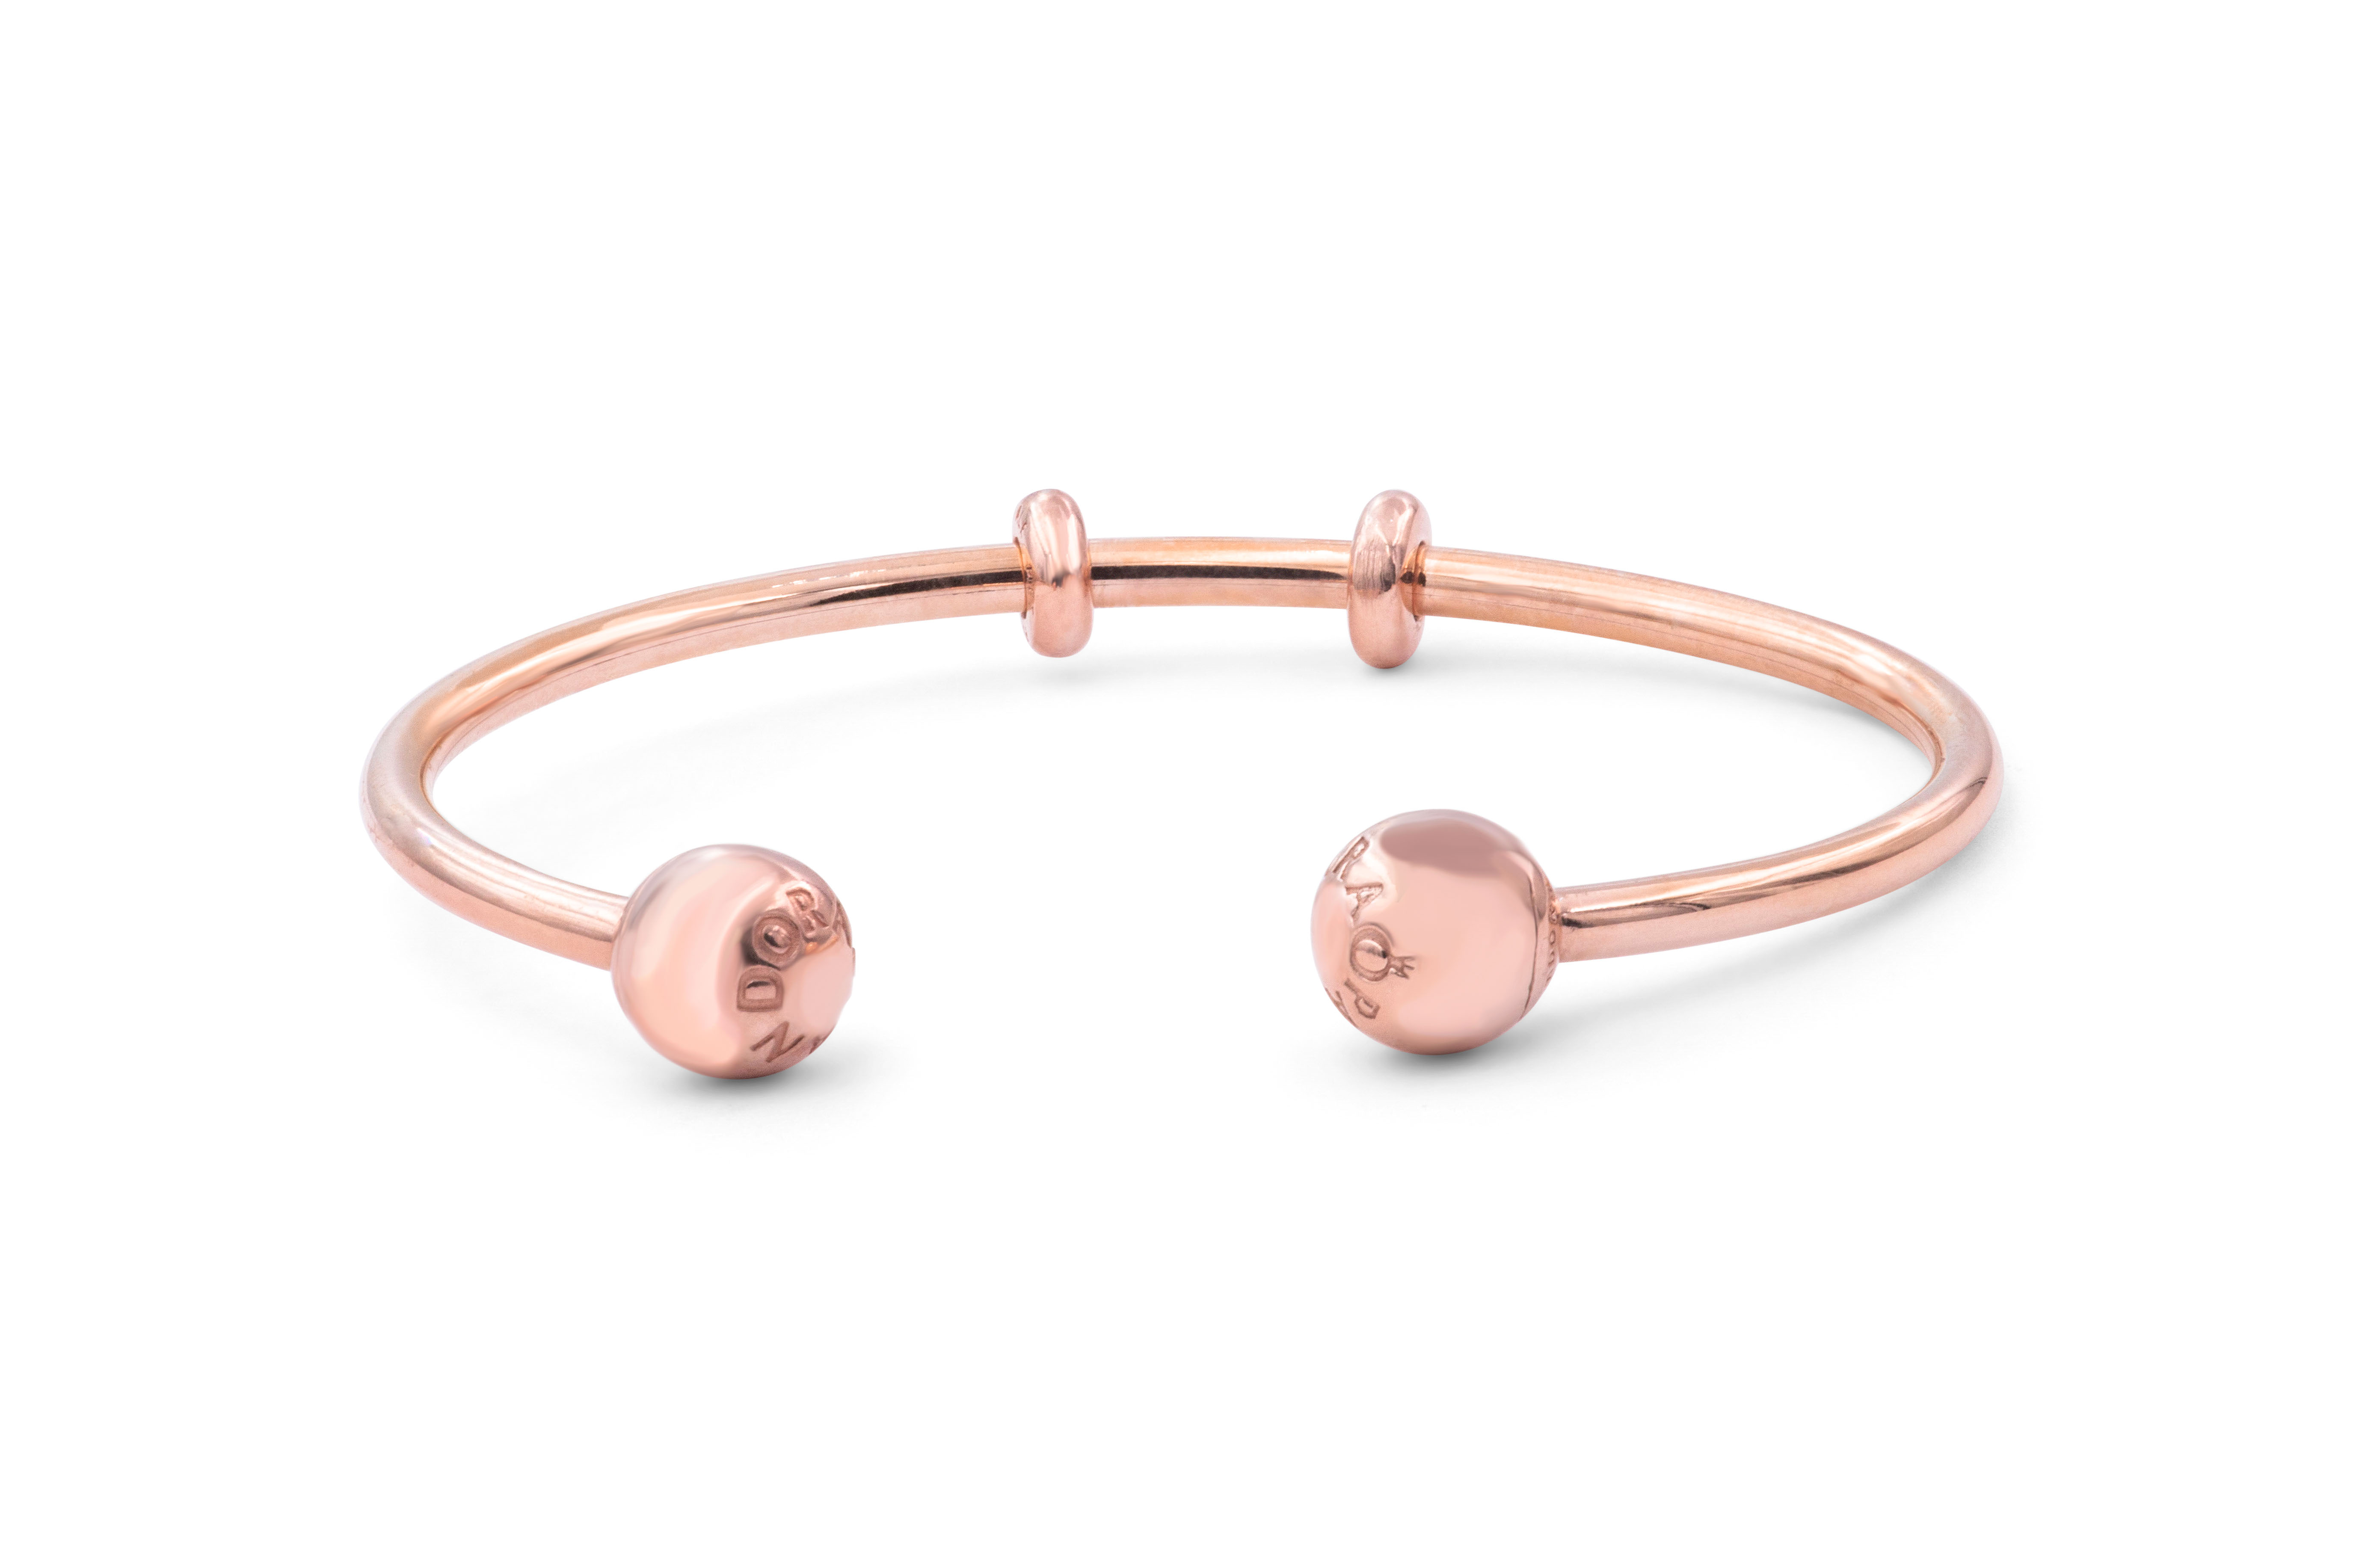 Pandora Open Bangle In Pandora Rose With Silicone Stoppers And Interchangeable End Caps